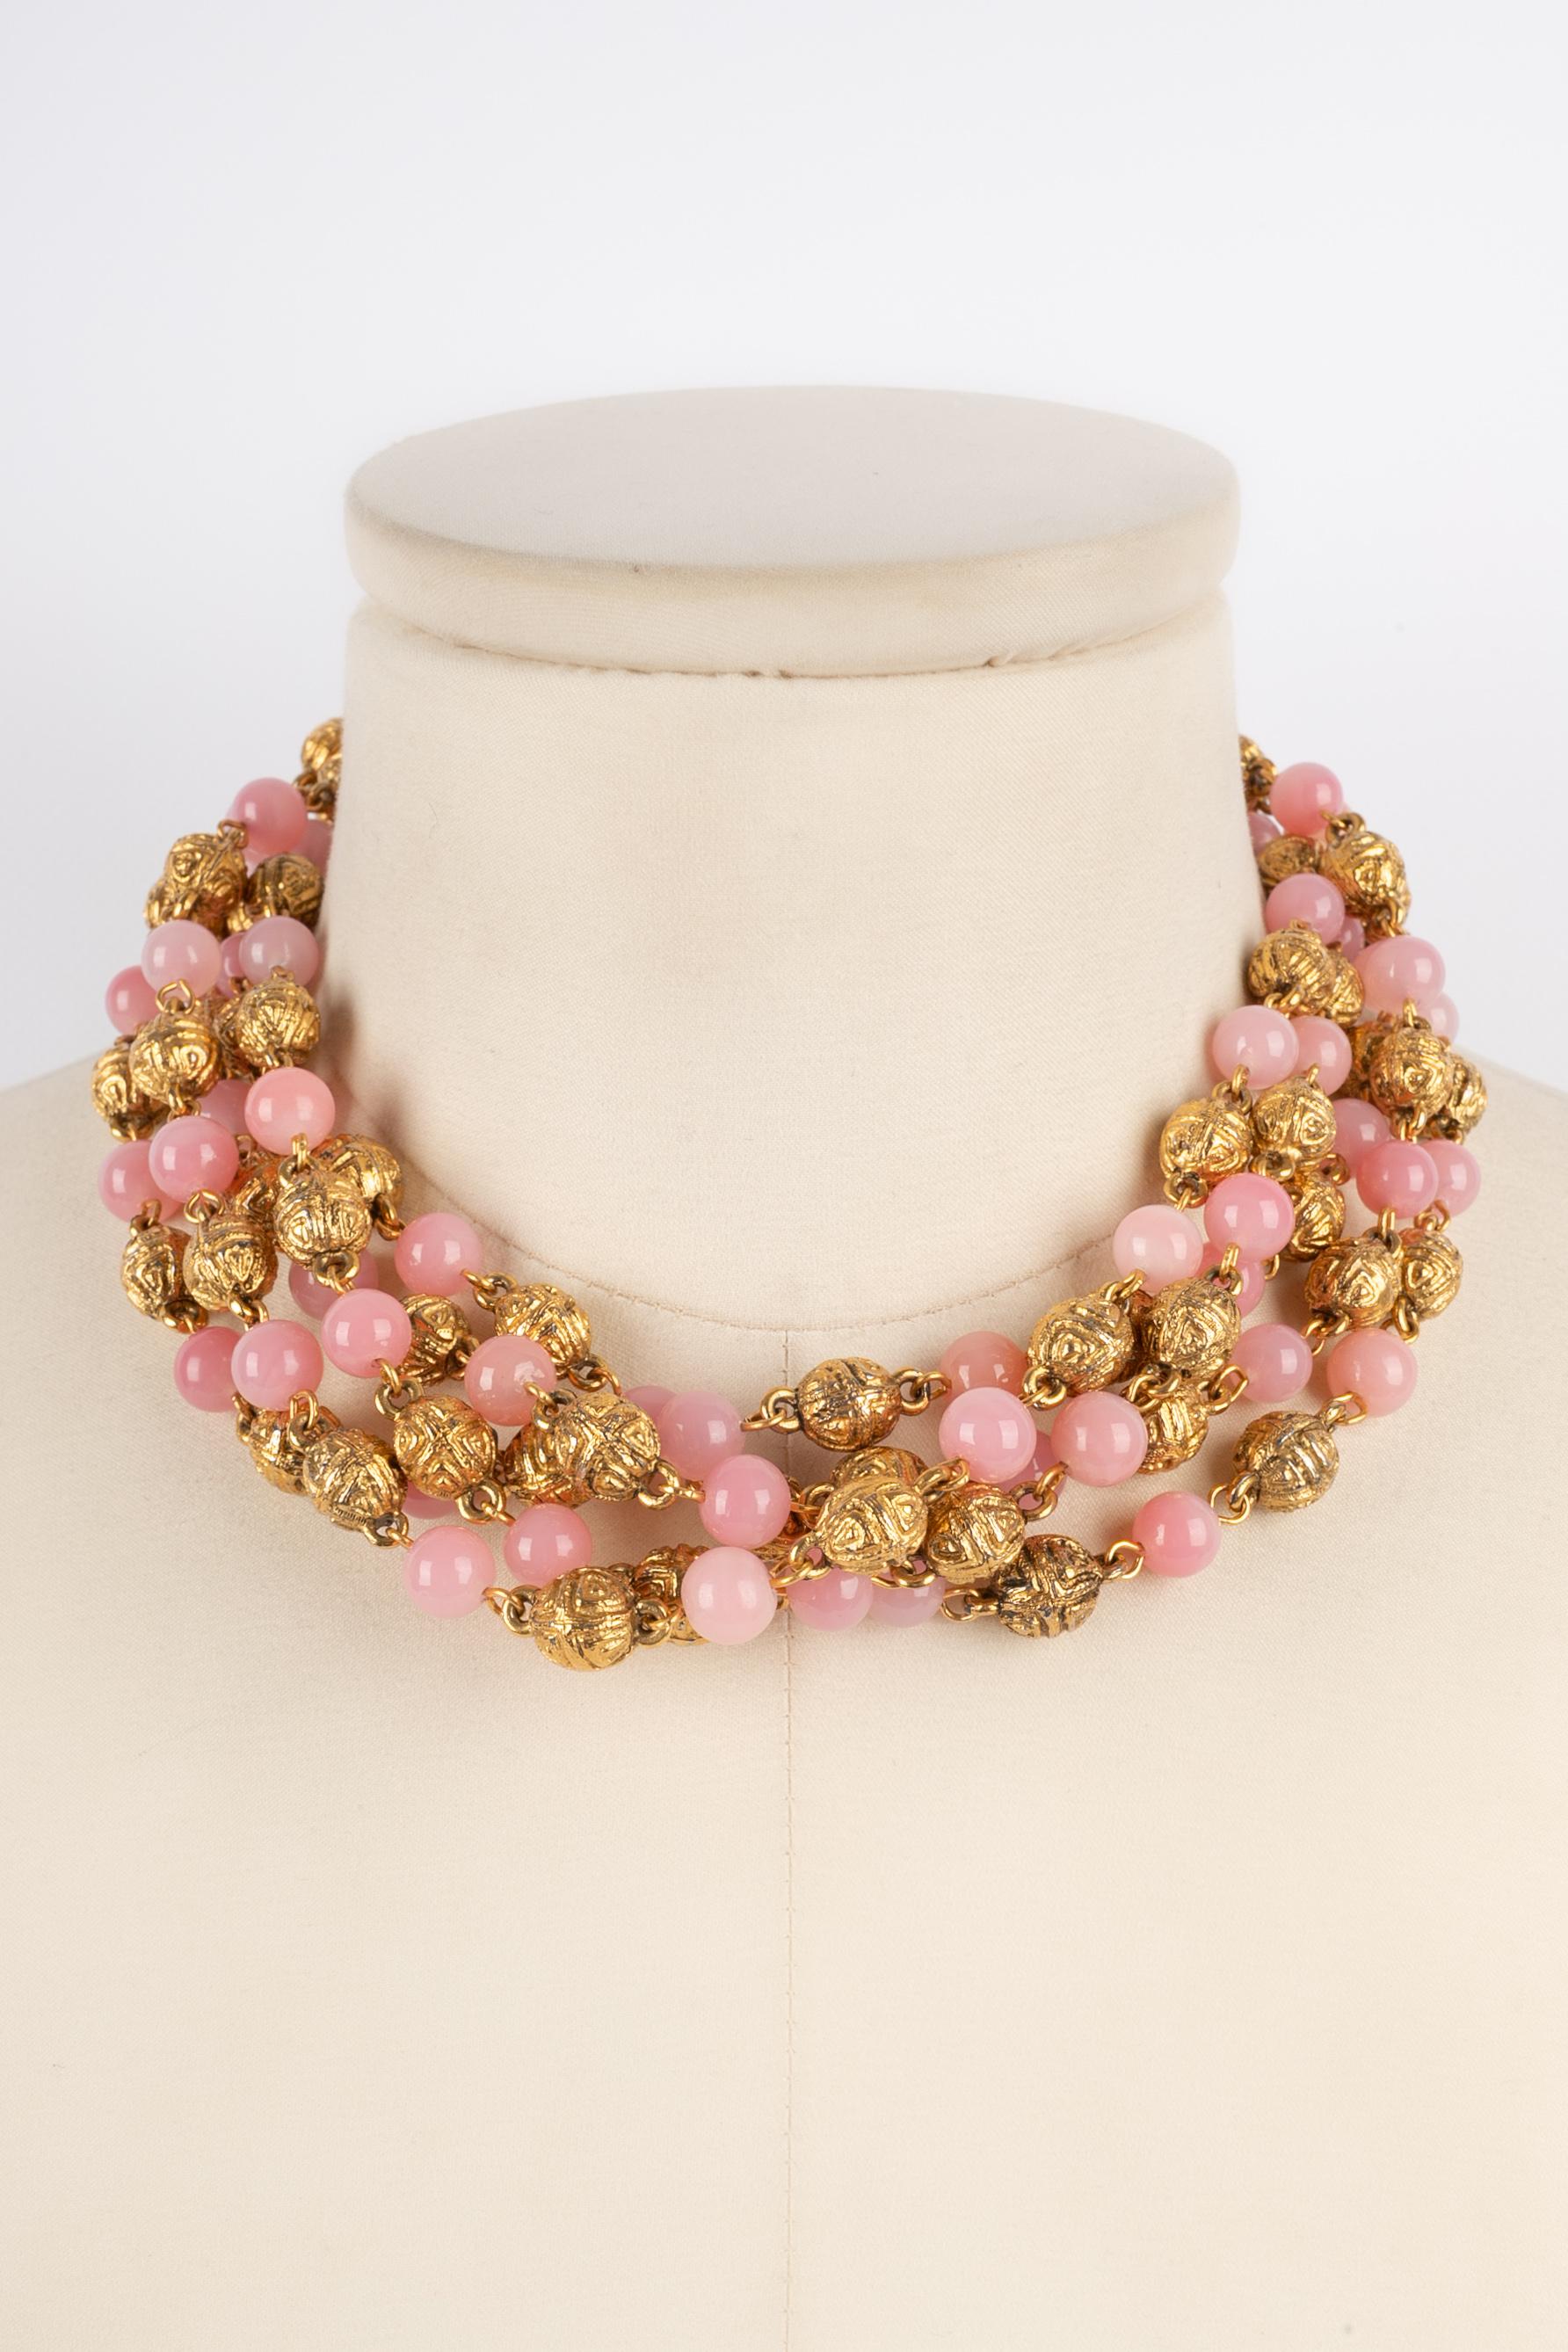 Women's Chanel pink pearl necklace